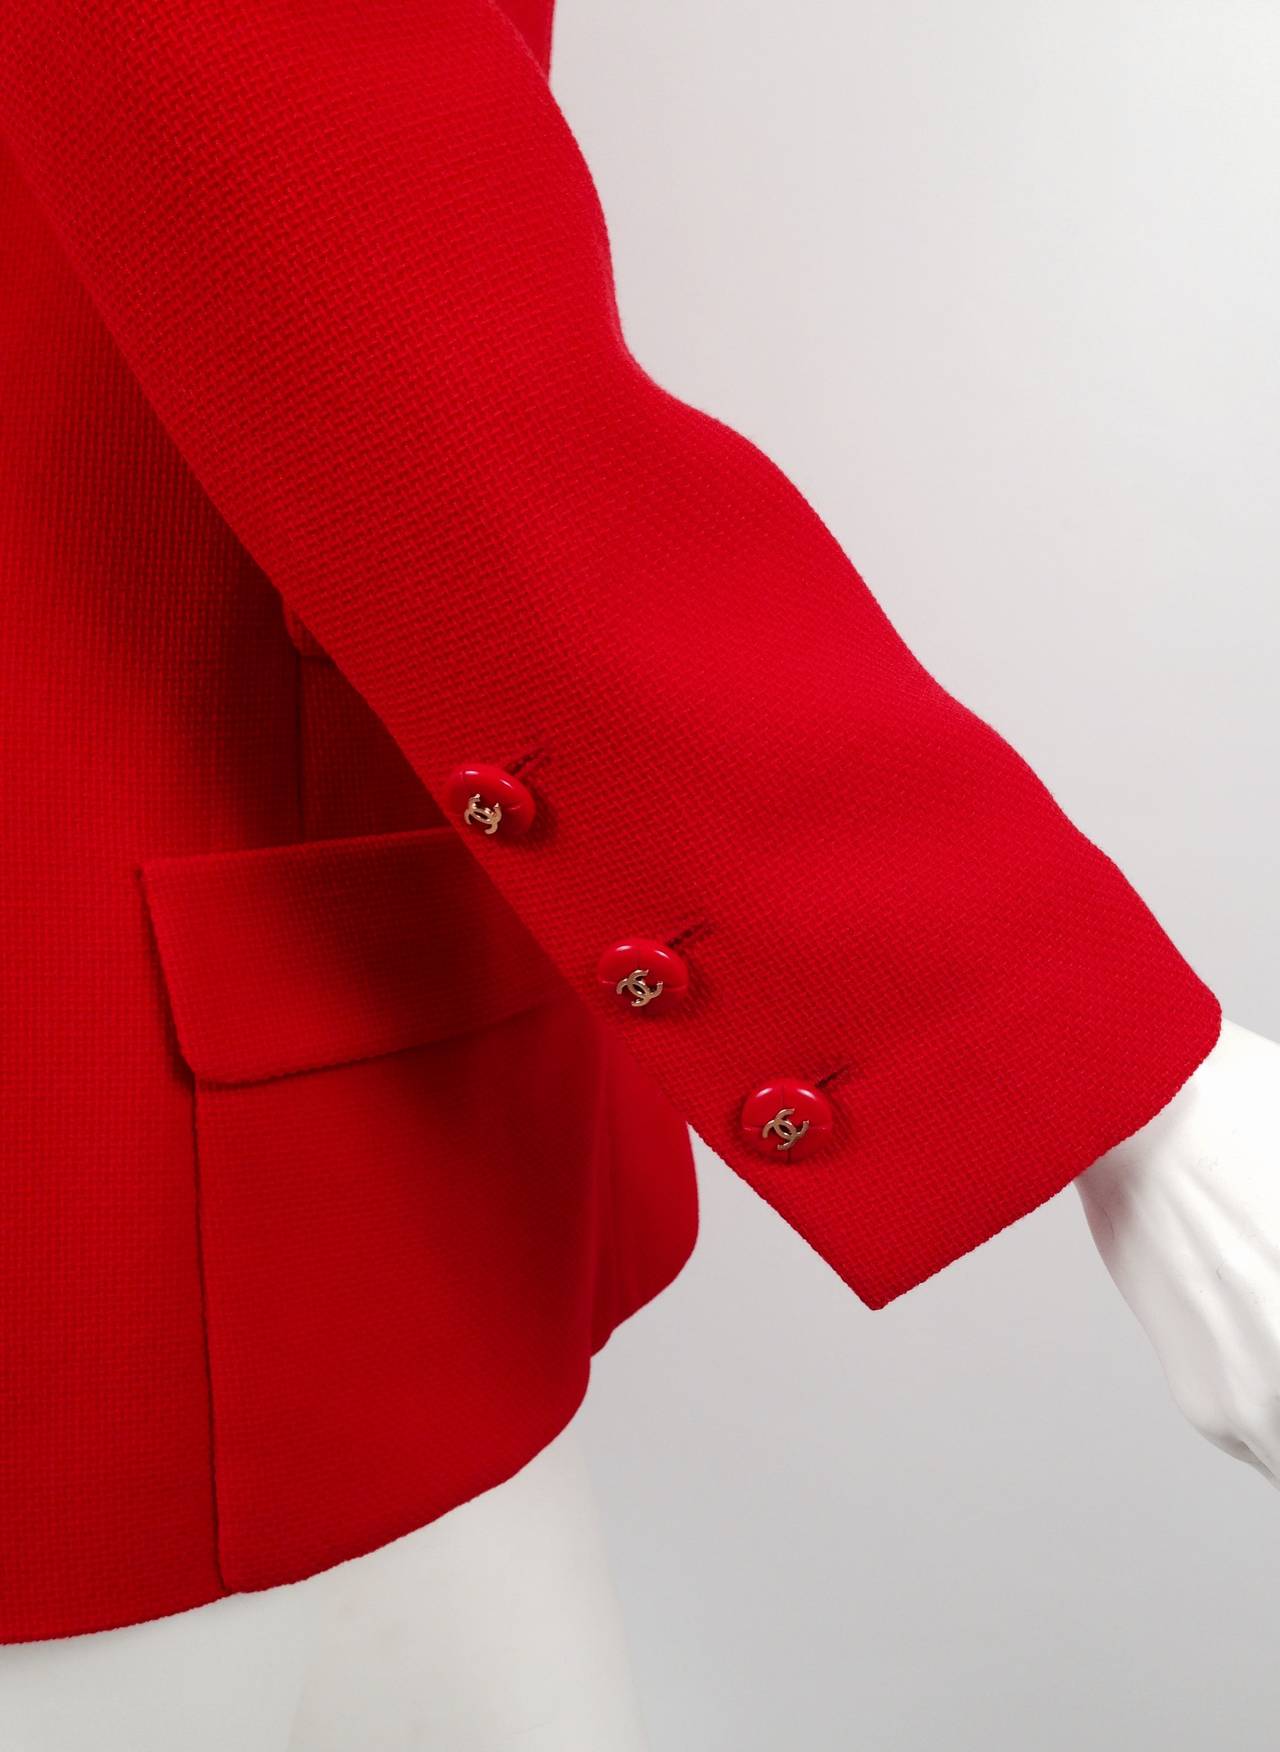 Chanel Red Pique Fabric Jacket 2